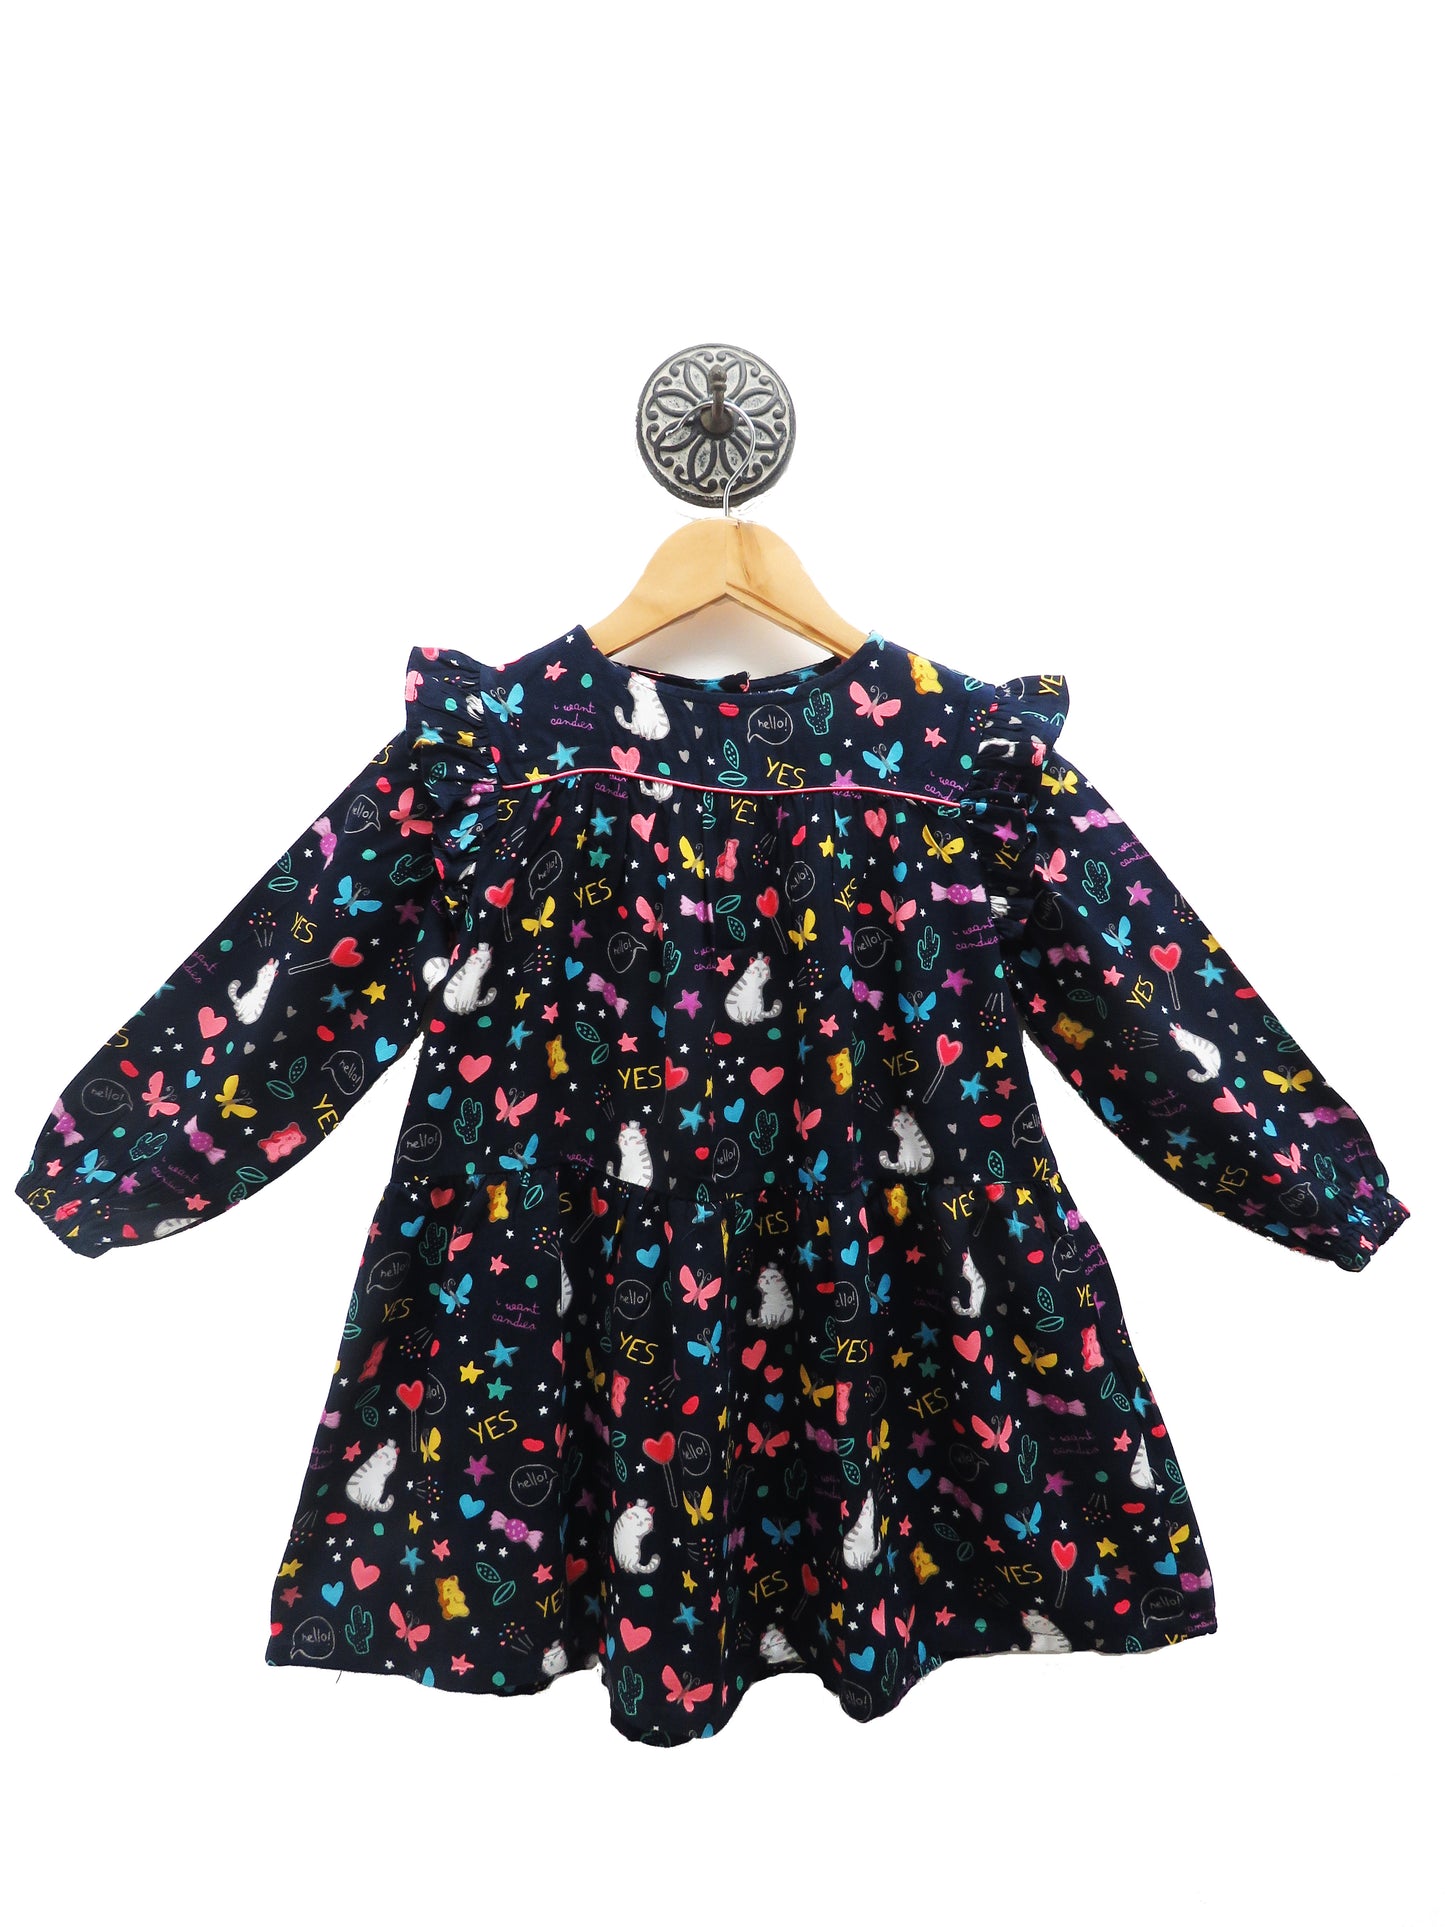 VIBRANT WINTER DRESS IN A KITTY AND CONFETI PRINT